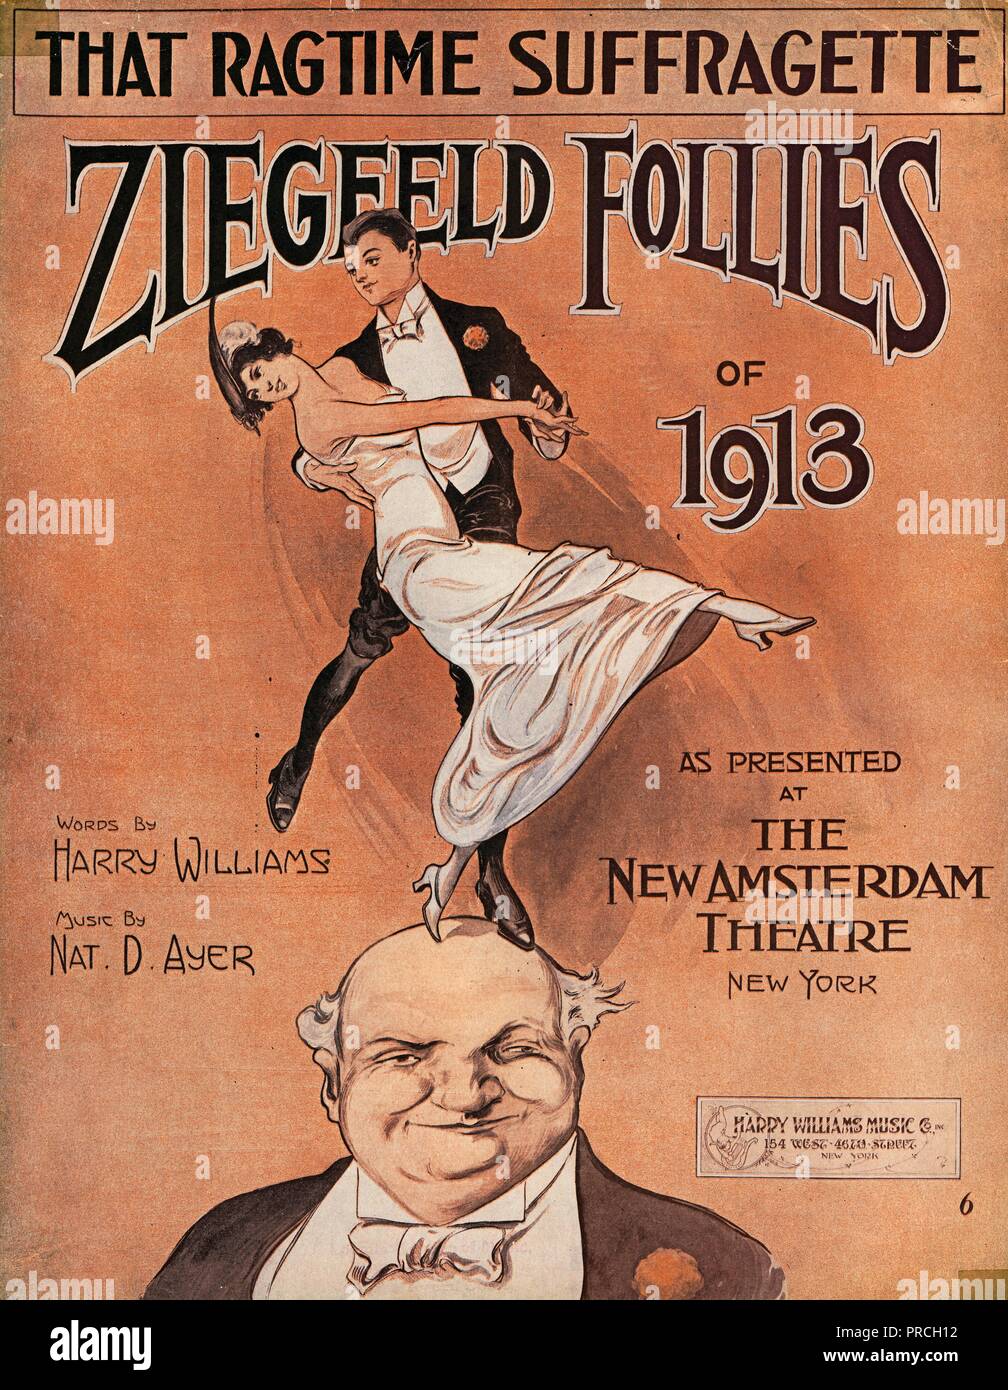 Sheet music cover for Harry Williams and Nat D Ayer's song 'That Ragtime Suffragette,' with an illustration of a young man and woman, each wearing formal clothing, dancing on the head of a mature man wearing a formal jacket and bowtie, produced by the Ziegfeld Follies, and published in New York, by the Harry Williams Music Company, for the American market, 1913. () Stock Photo